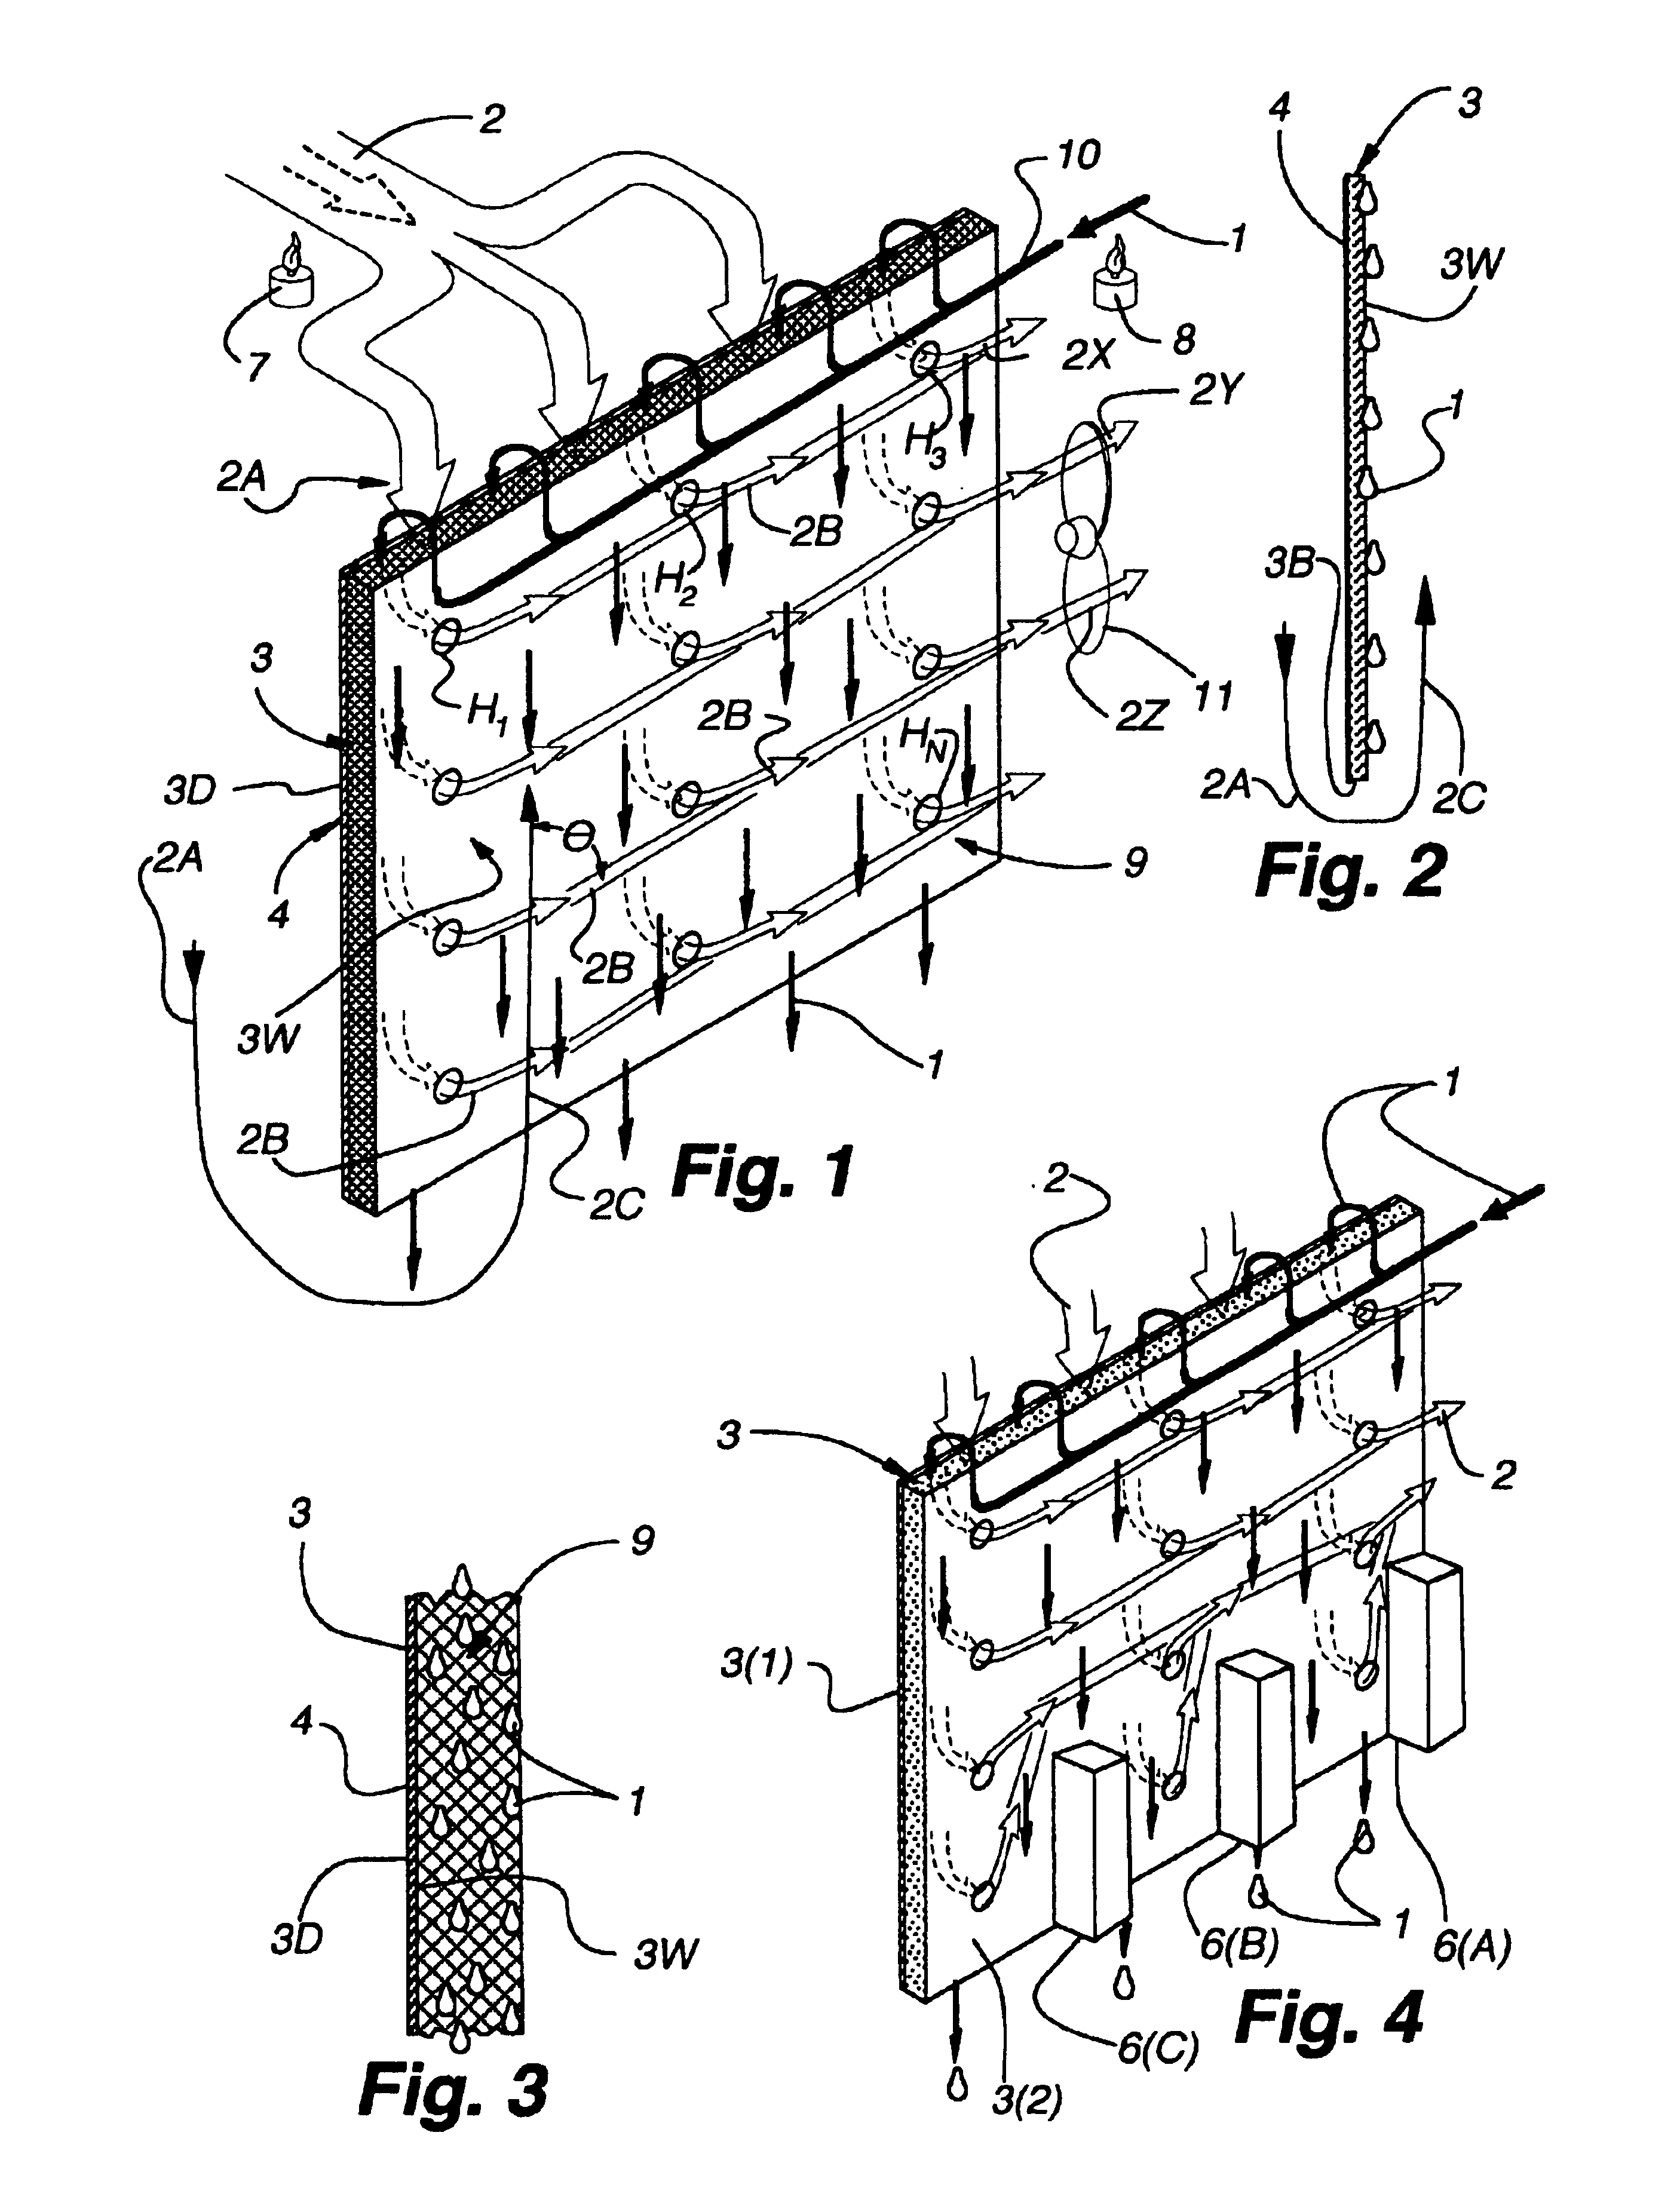 Method of evaporative cooling of a fluid and apparatus therefor